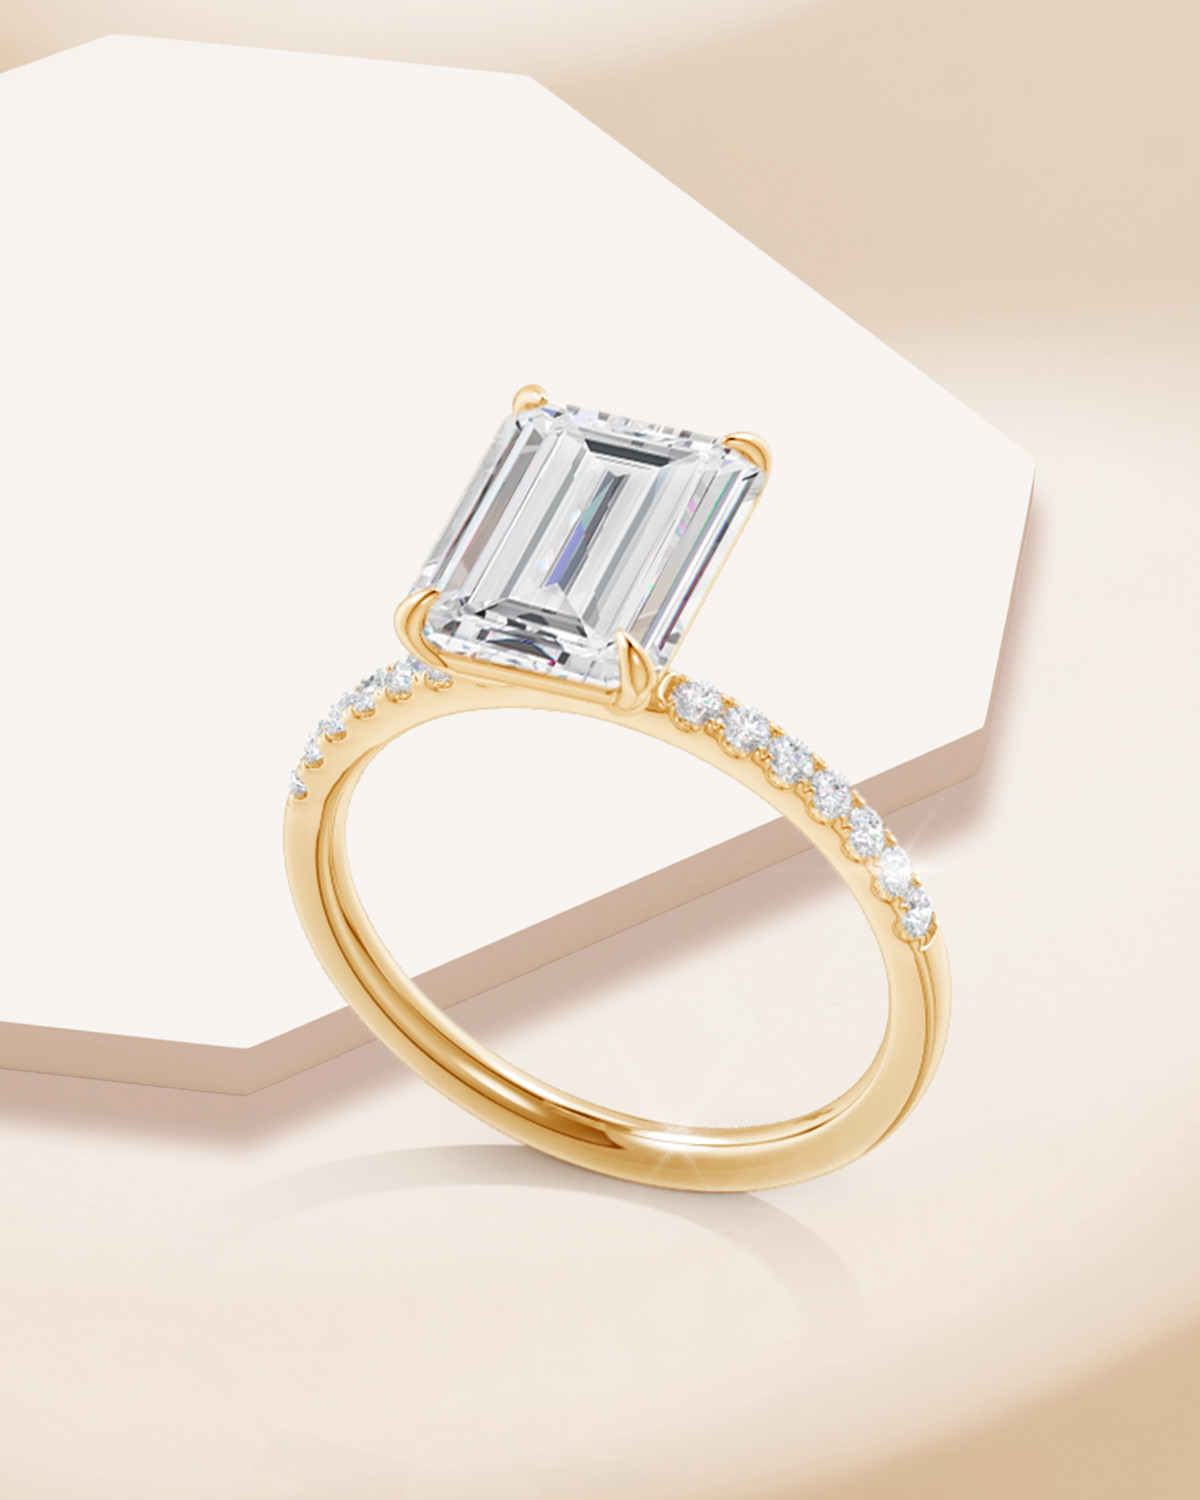 3 Reasons To Choose A Lab-Grown Diamond Ring For Your Christmas Proposal